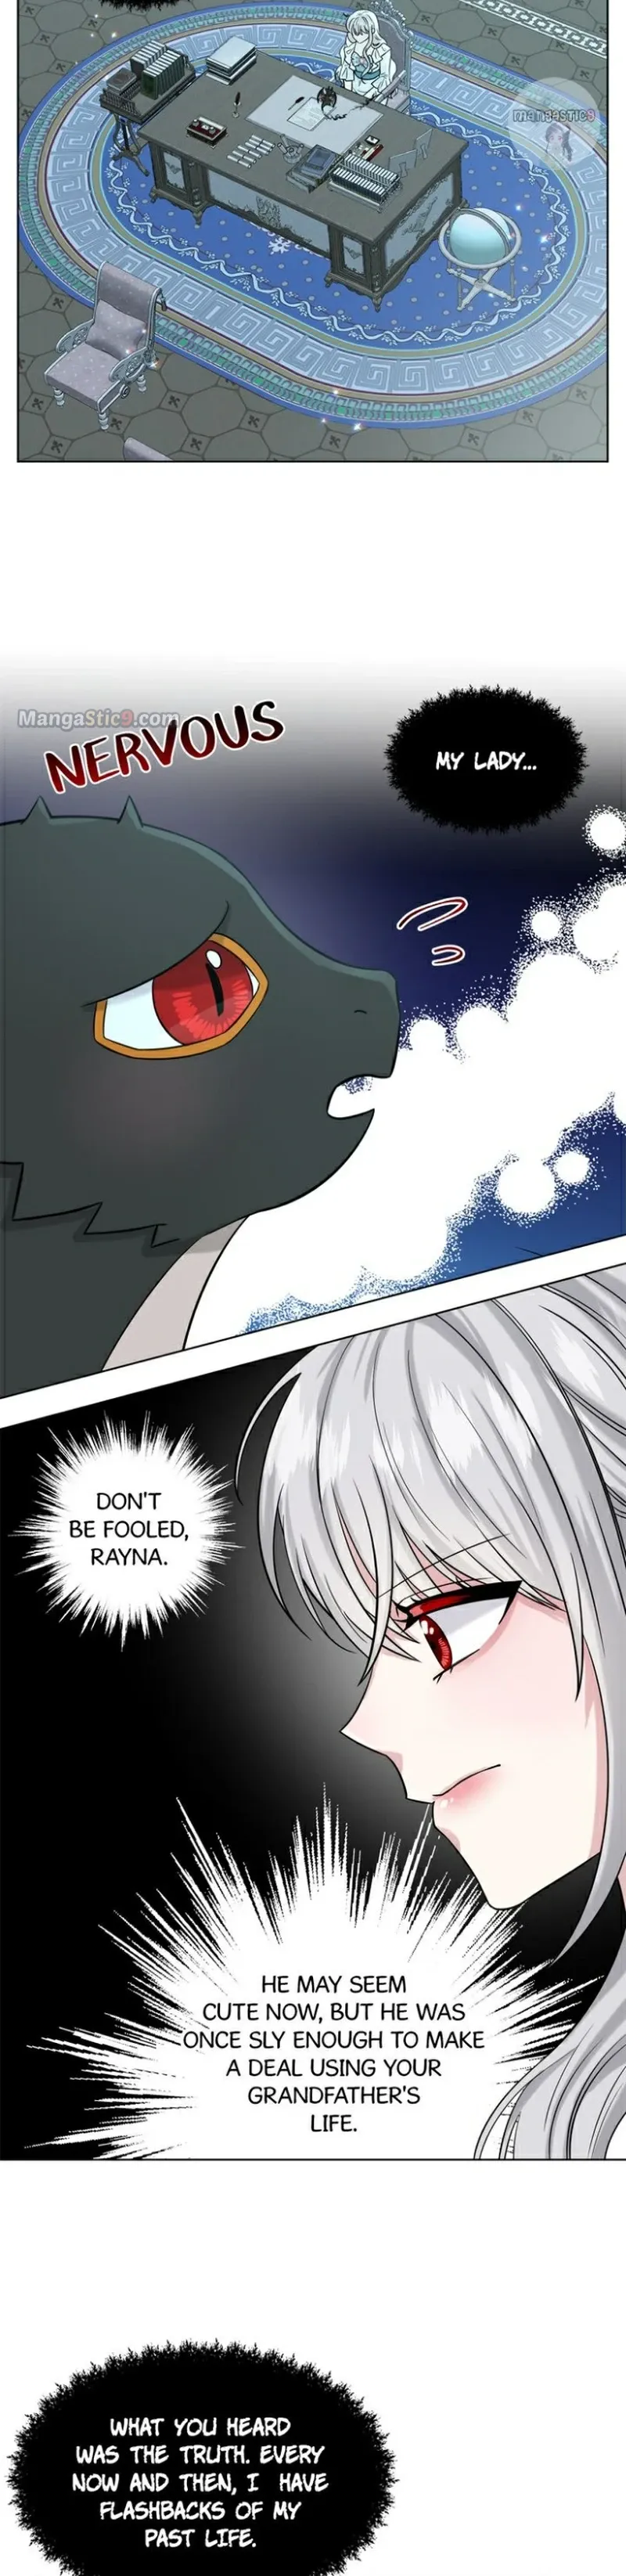 How to Get Rid of My Dark Past? Chapter 65 page 3